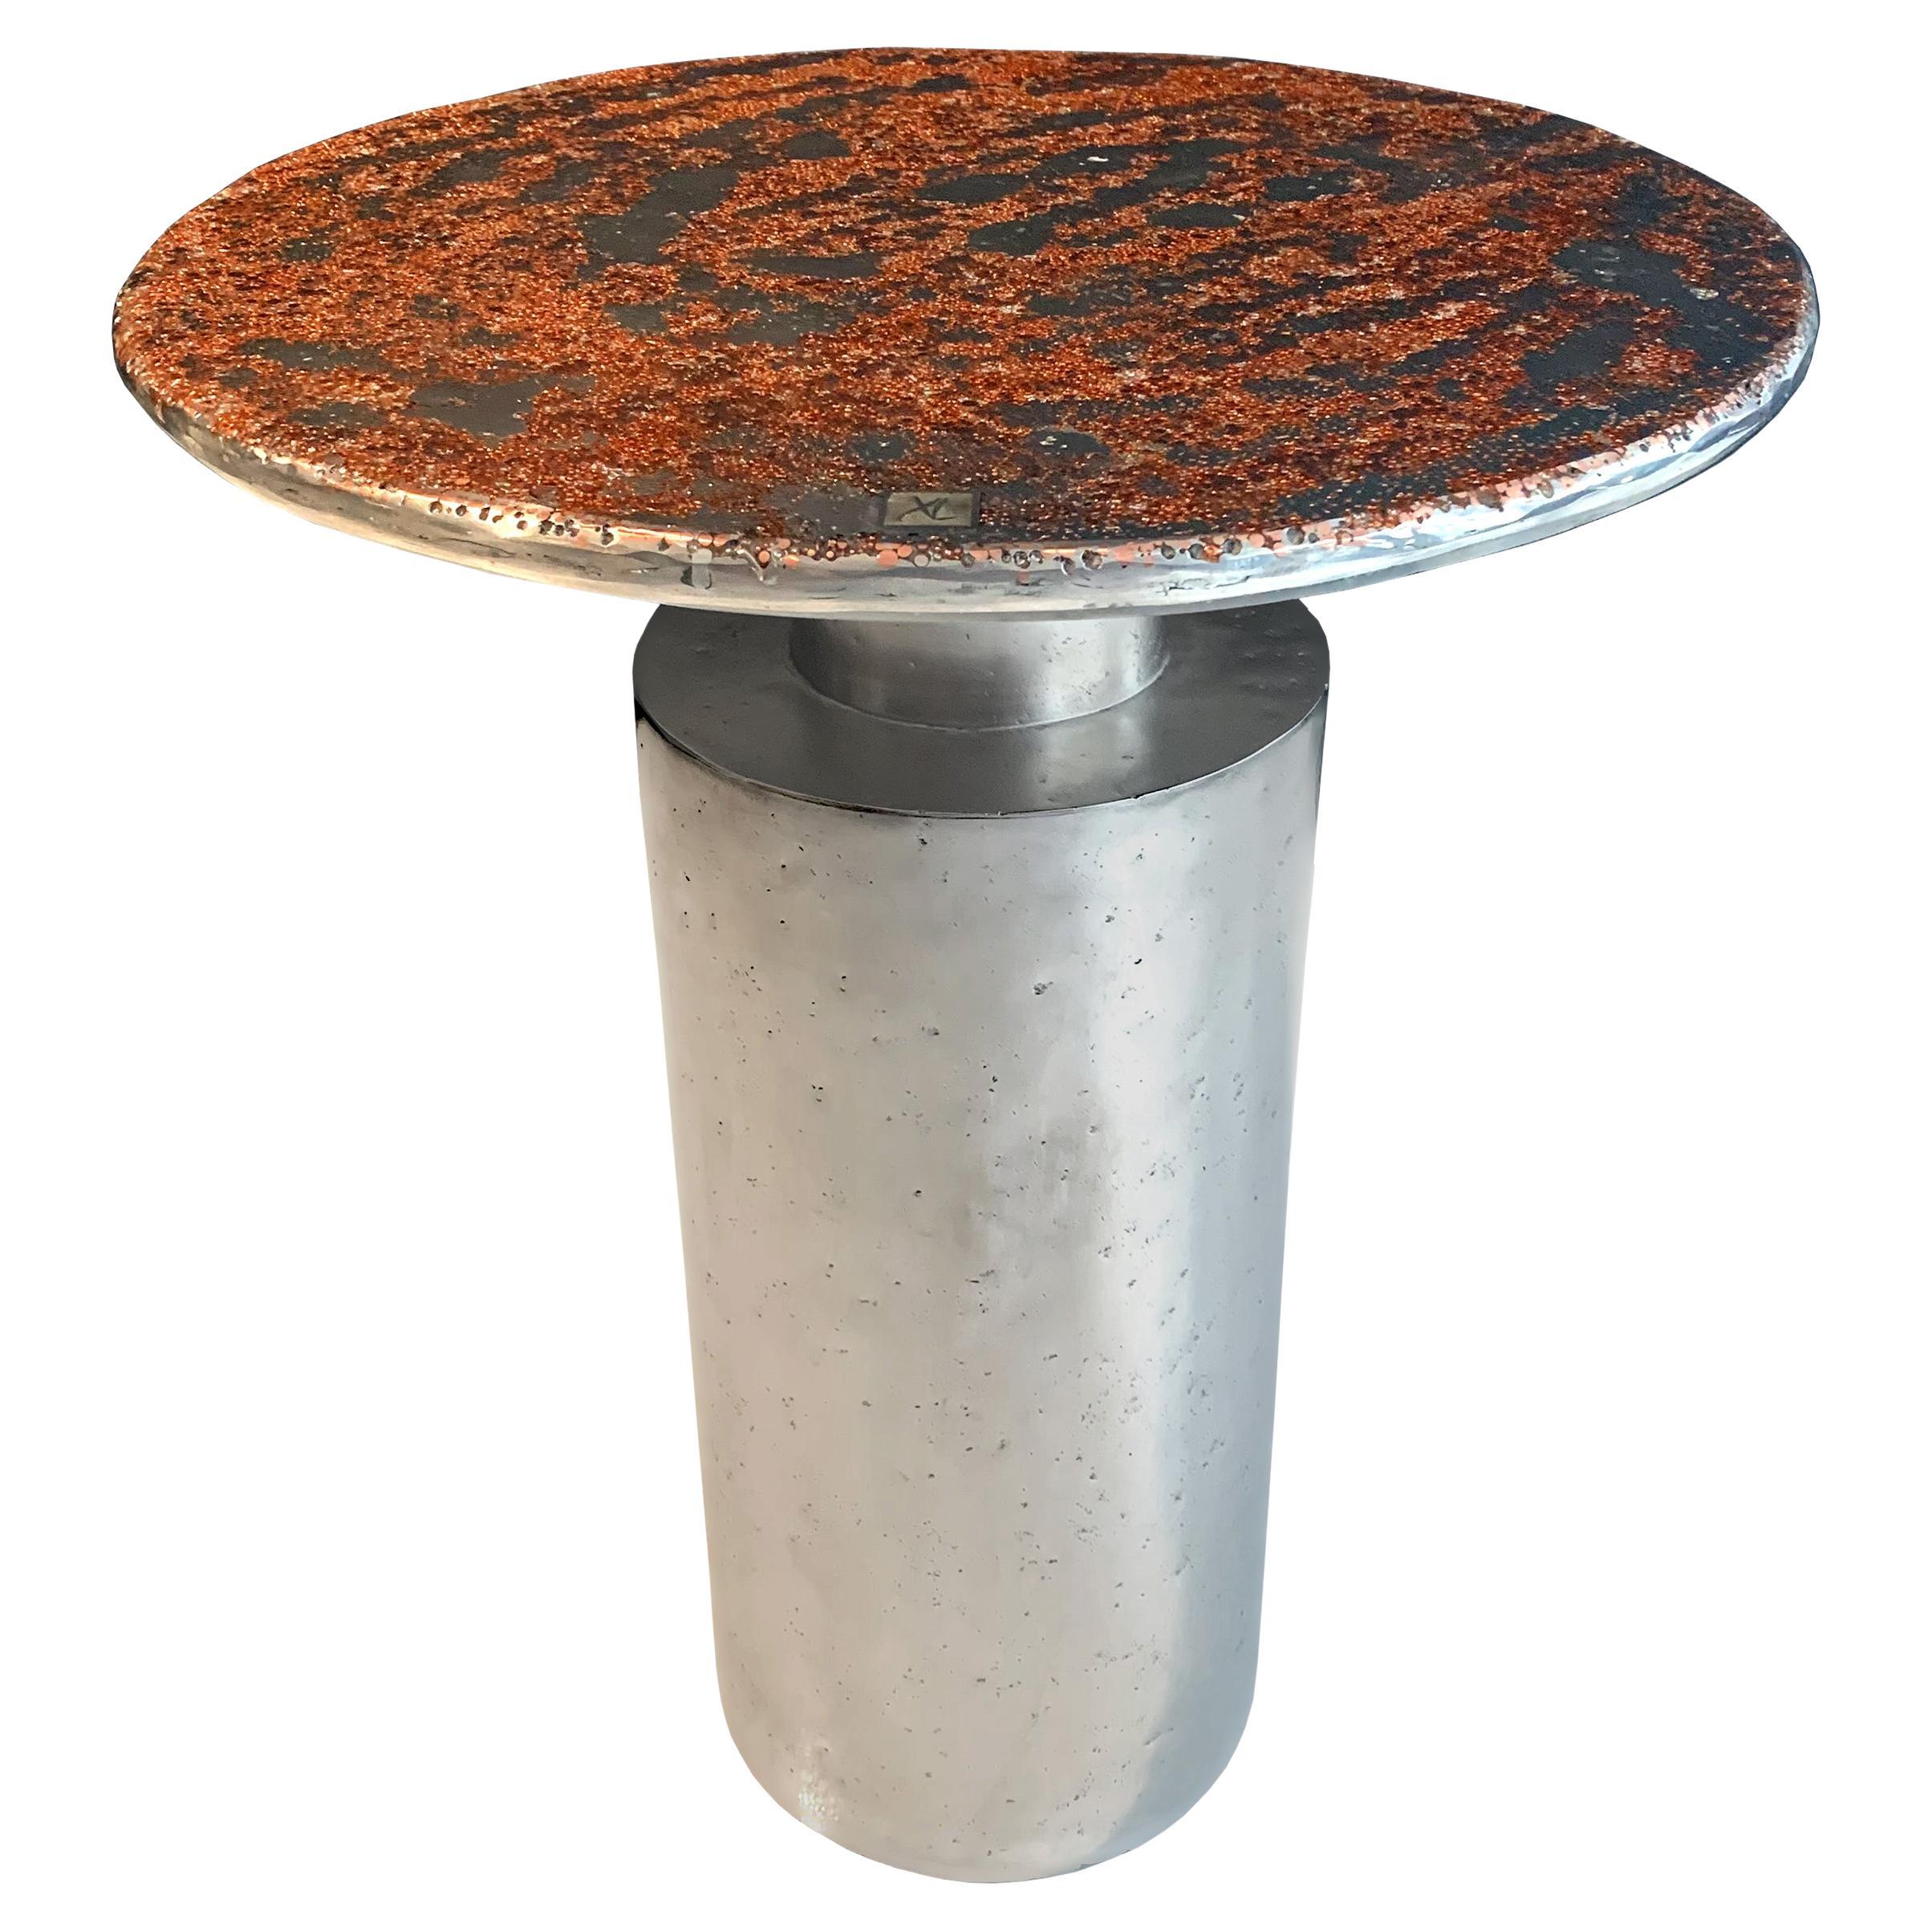 21st Century Side Table "Copper & Pewter" by Xavier Lavergne, Made in France